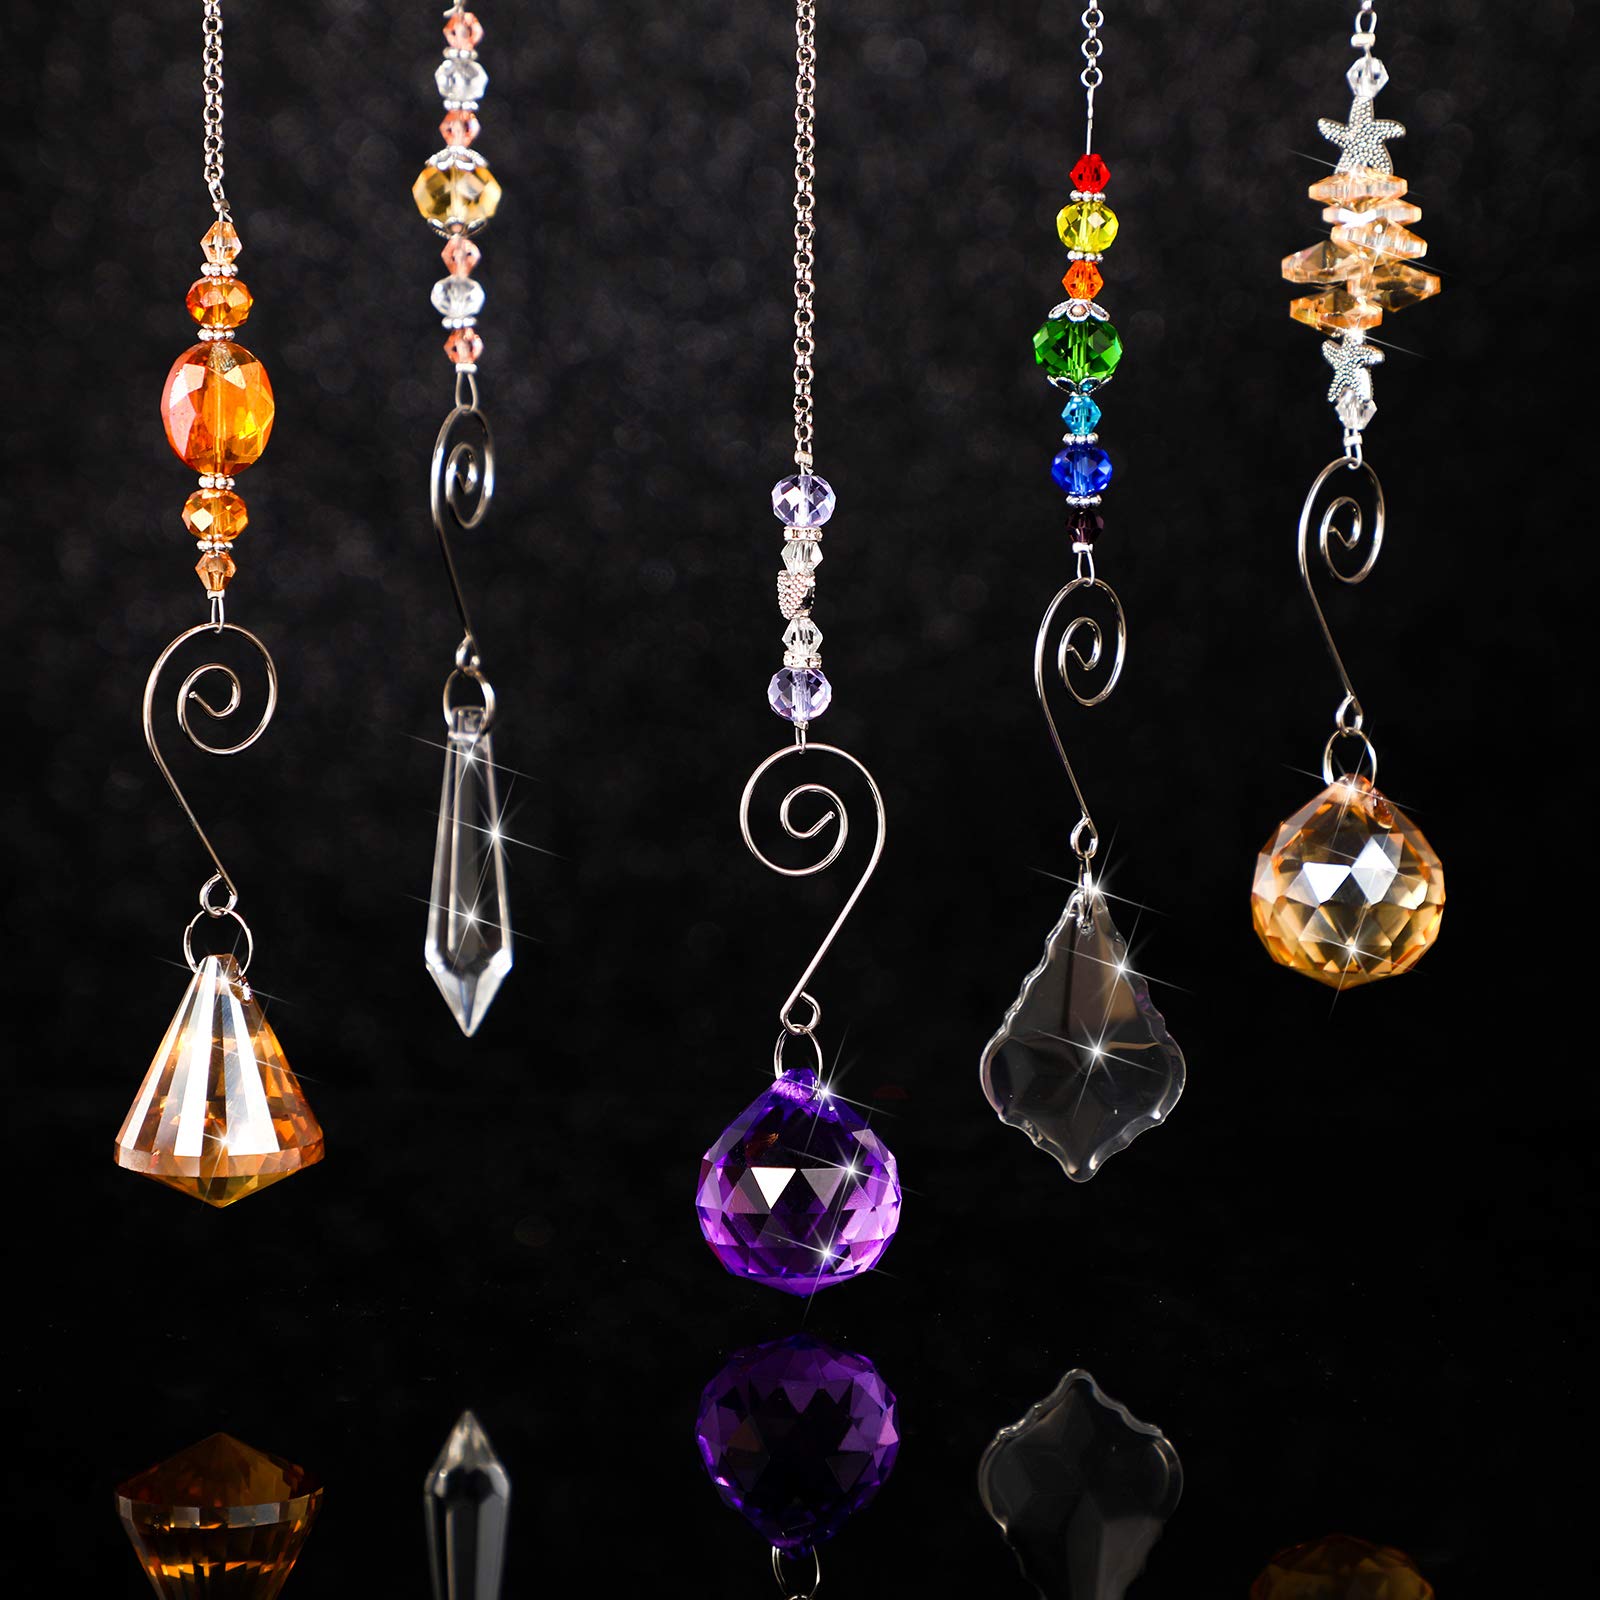 9 Pieces Crystal Suncatchers Valentine Hanging Catchers with Chain Colorful Glass Pendant Beads Chandelier Prism Ornament for Window Home Wall Tree Cars Wedding Gift Hanging Decoration